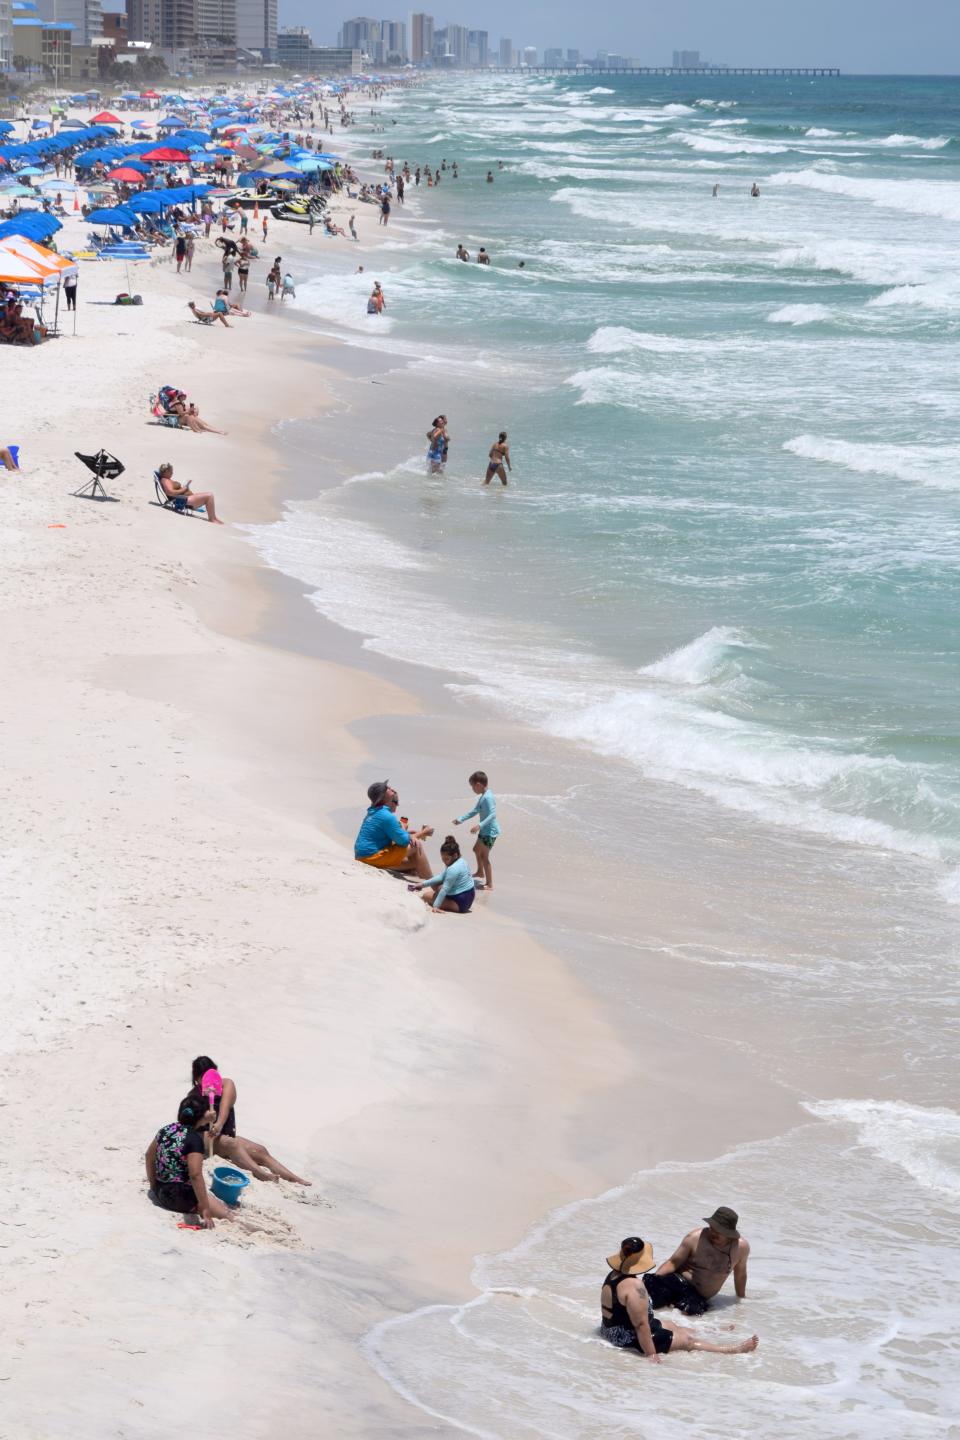 Dangerous rip currents around Panama City Beach, Florida, led to the deaths of three tourists over the weekend.